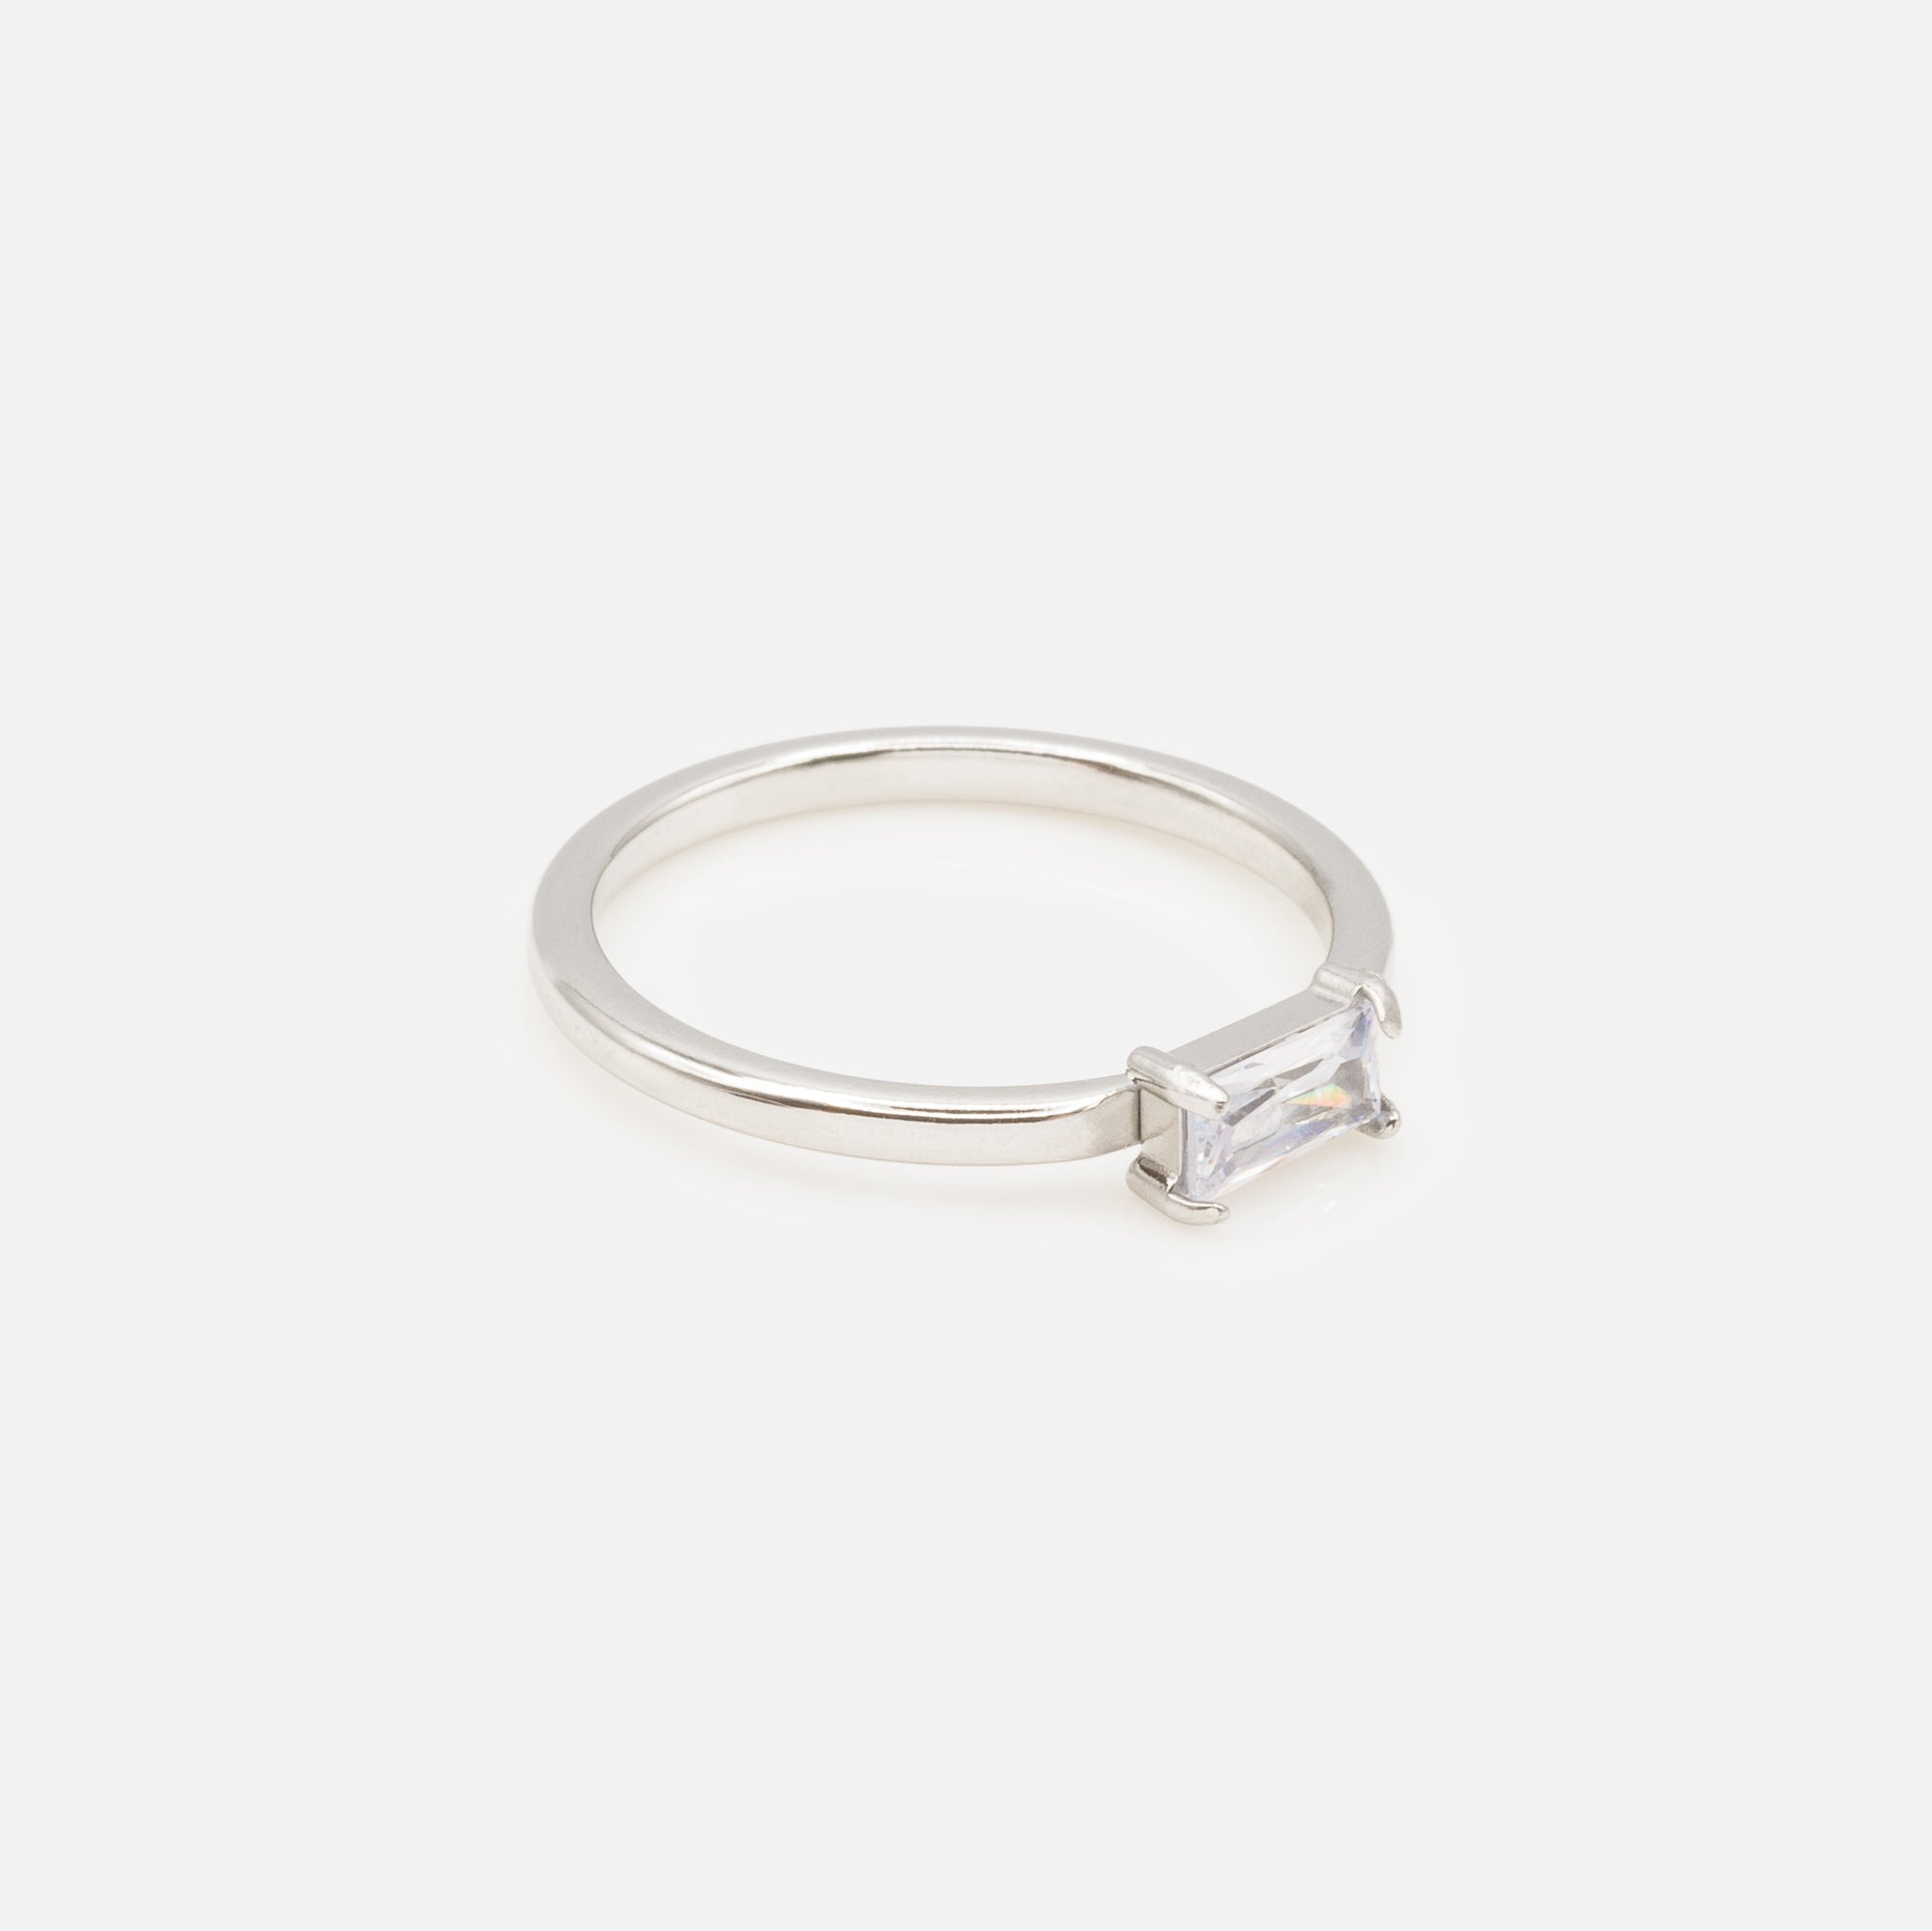 Silver ring with white rectangular stone in stainless steel